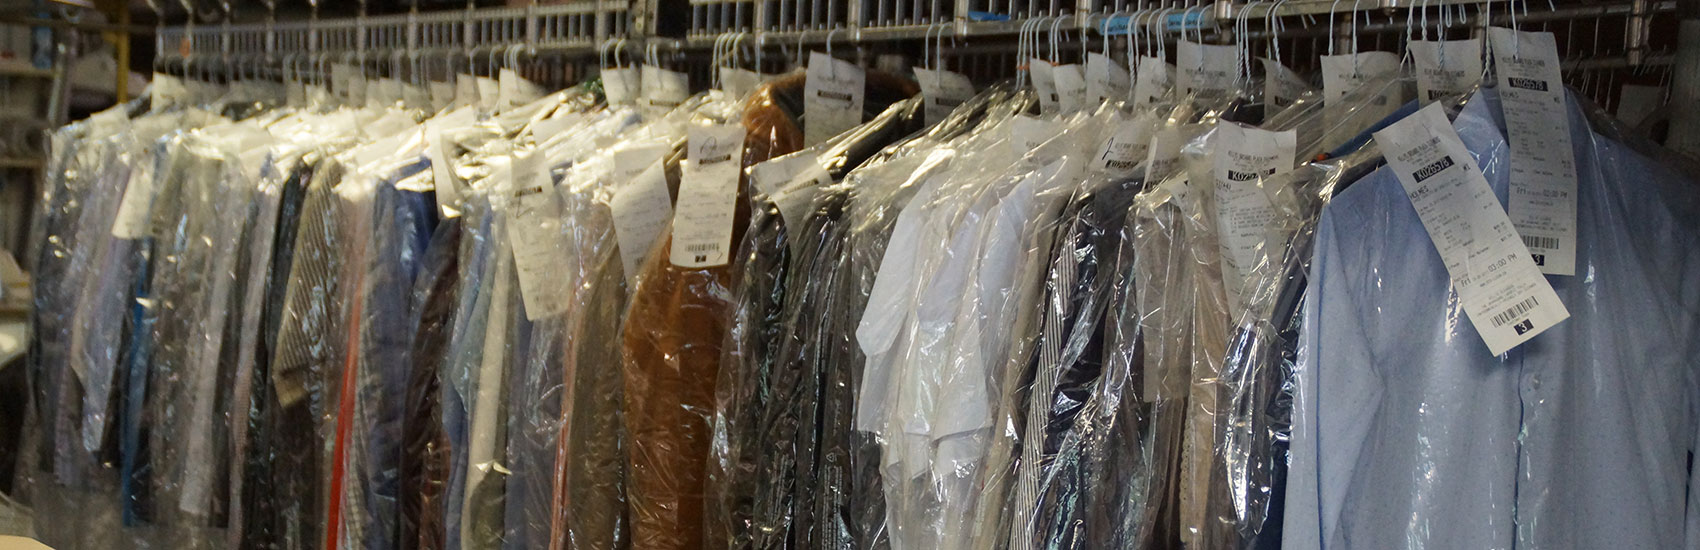 Drycleaners - wedding gown cleaners - Orchard Park location for Eco-Clean Drycleaning Centres Kelowna